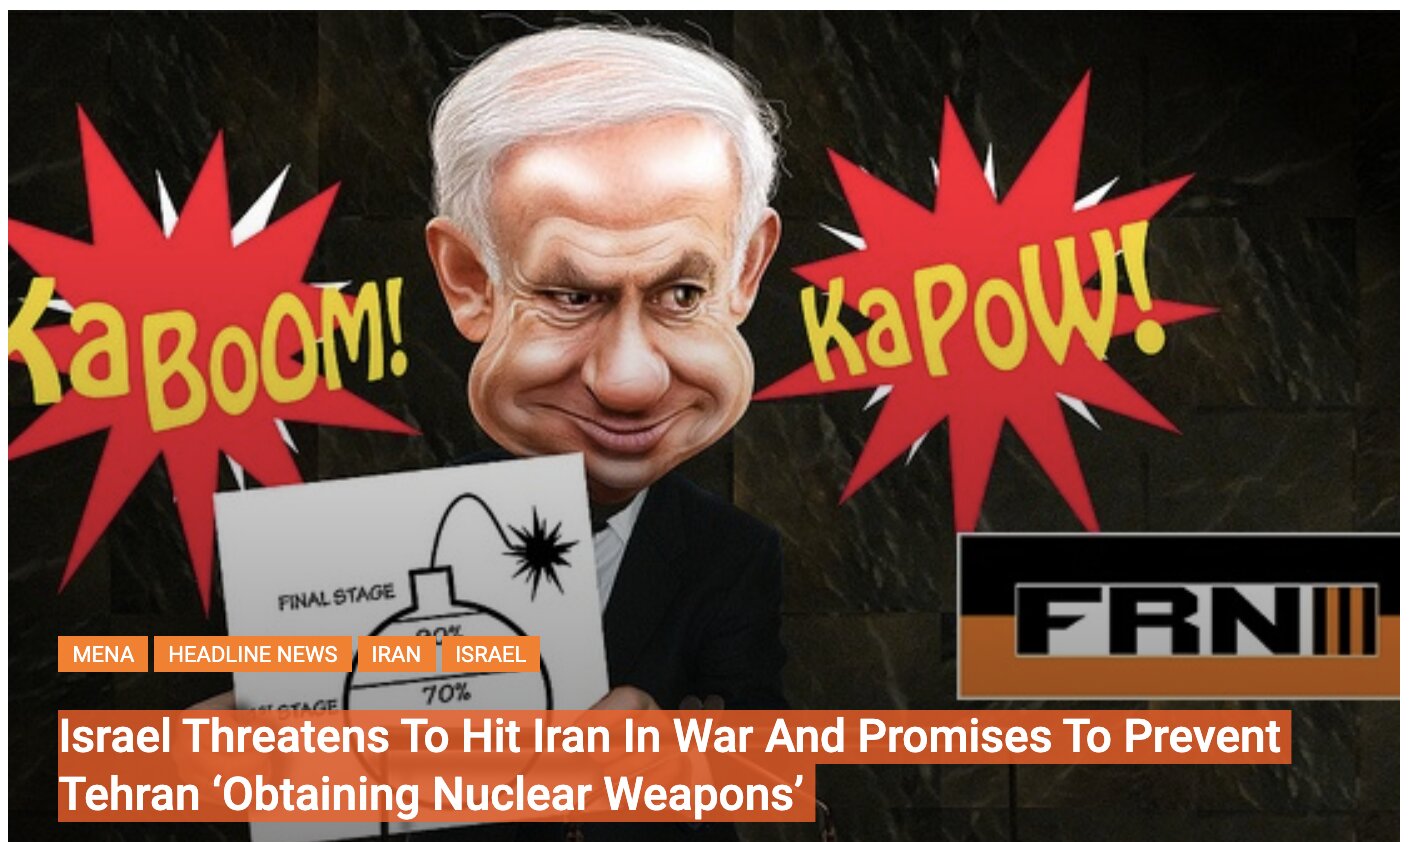 Israel Threatens To Hit Iran In War And Promises To Prevent Tehran ‘Obtaining Nuclear Weapons’